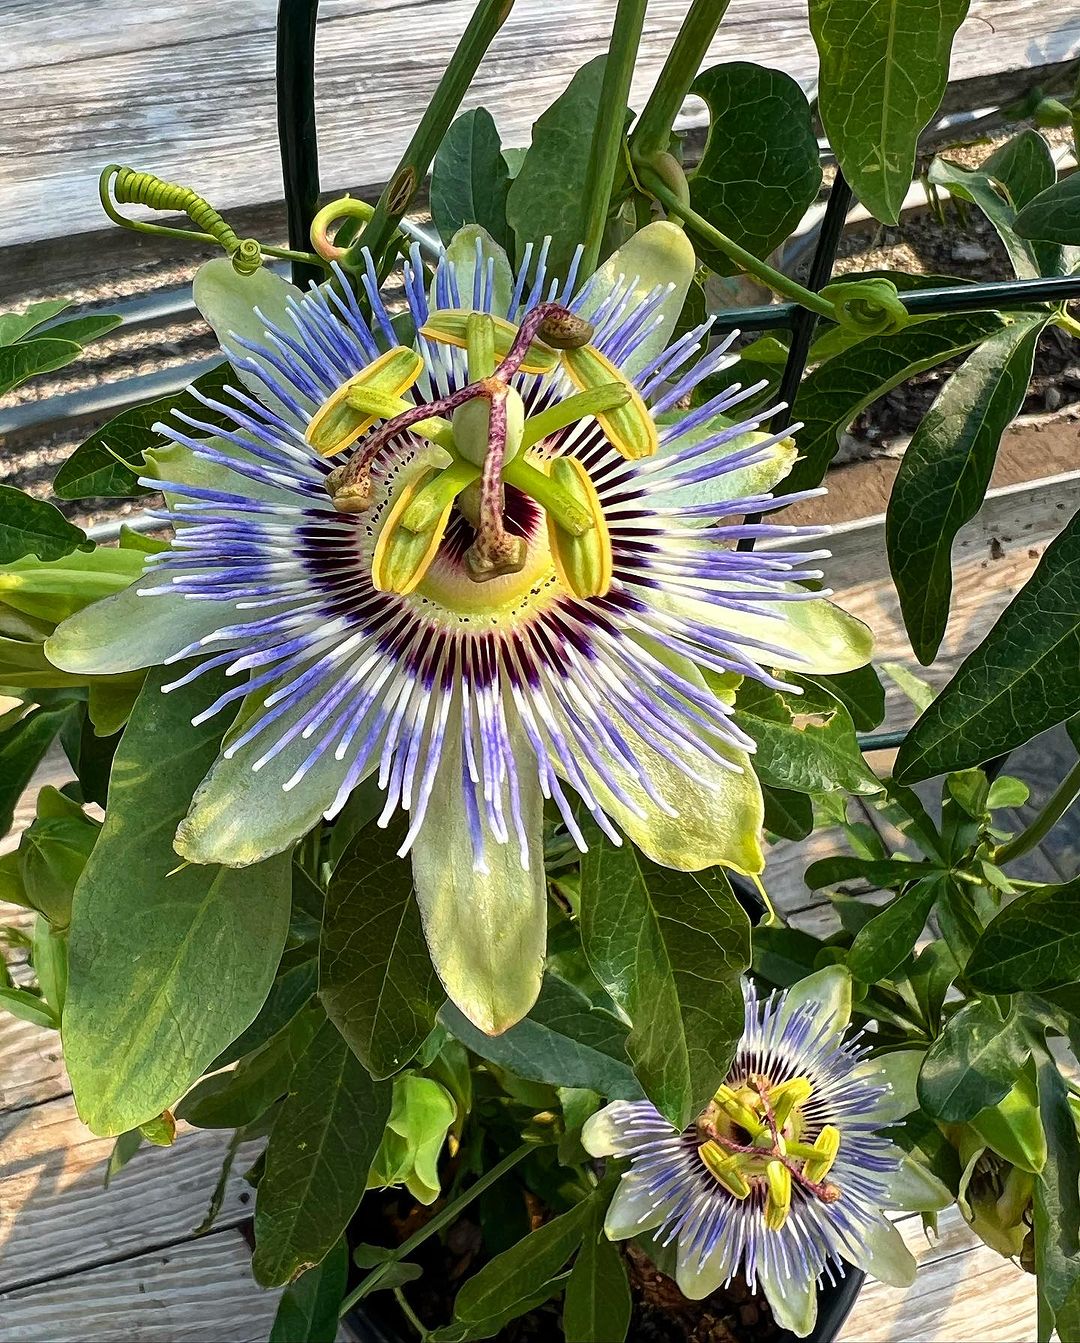 Blue Passion Flower blooming in the garden.